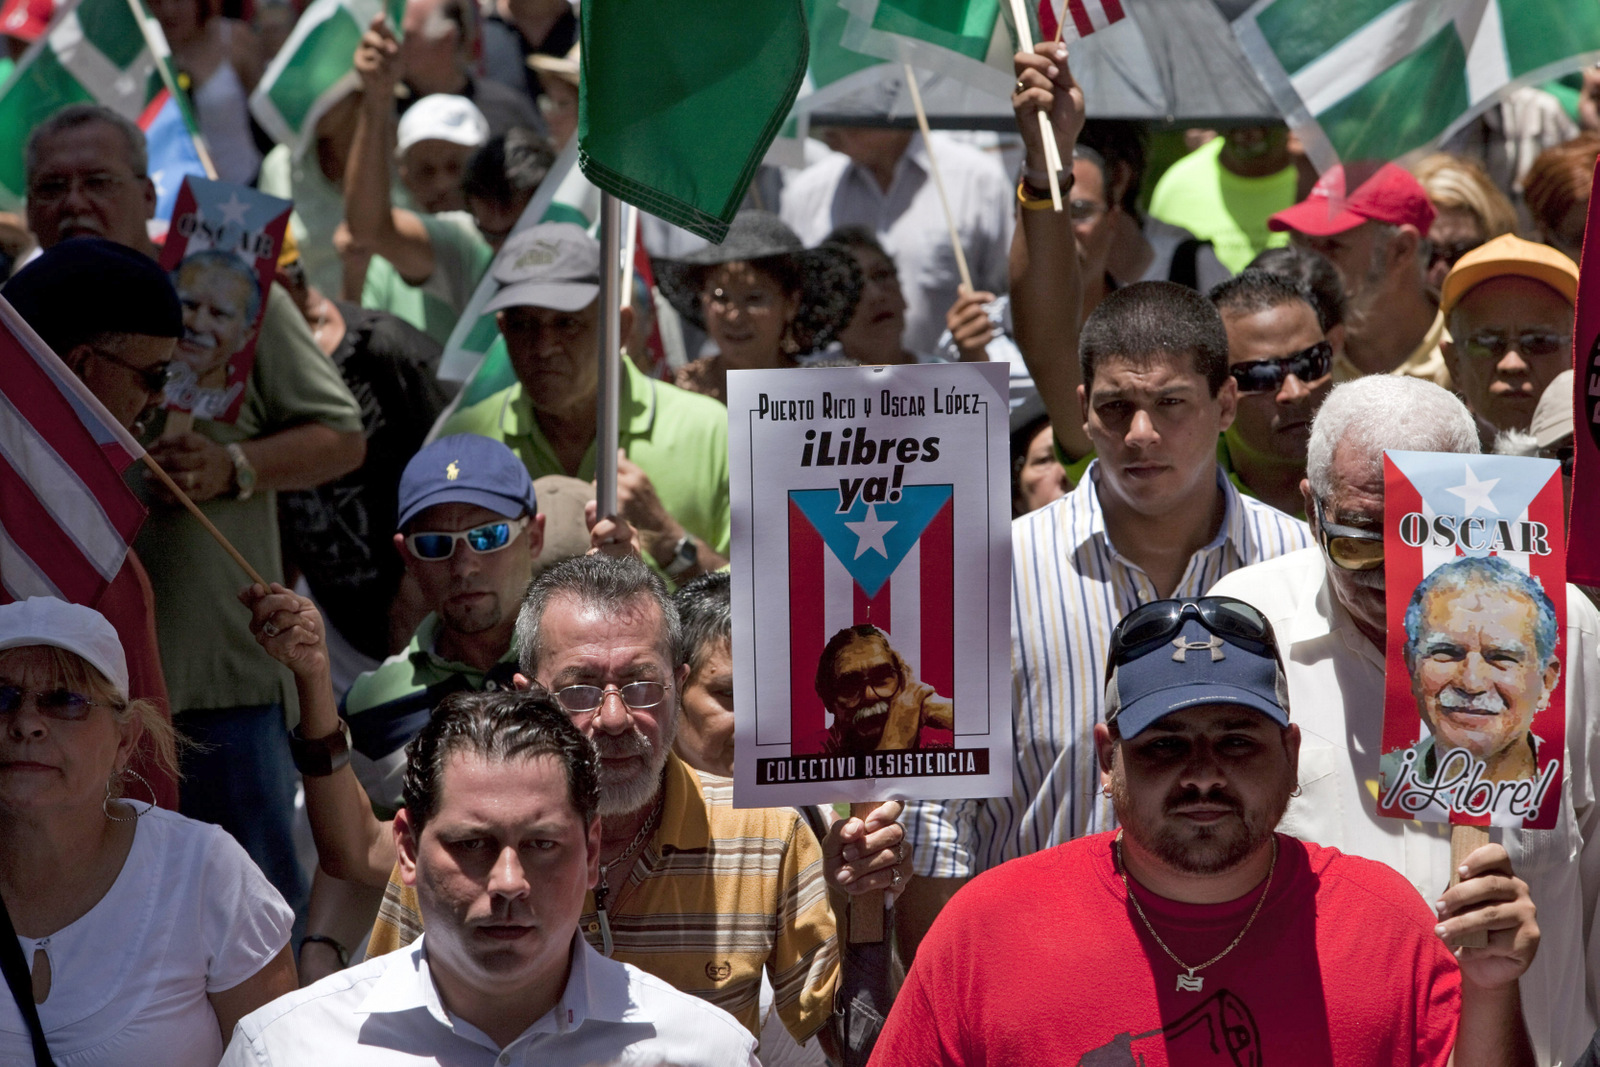 Pro-independence demonstrators march demanding the release of political prisoners in San Juan, Puerto Rico, Tuesday, June 14, 2011. Obama's trip marks the first visit to Puerto Rico by a sitting U.S. President since John F. Kennedy's 1961 visit. (AP/Ramon Espinosa)